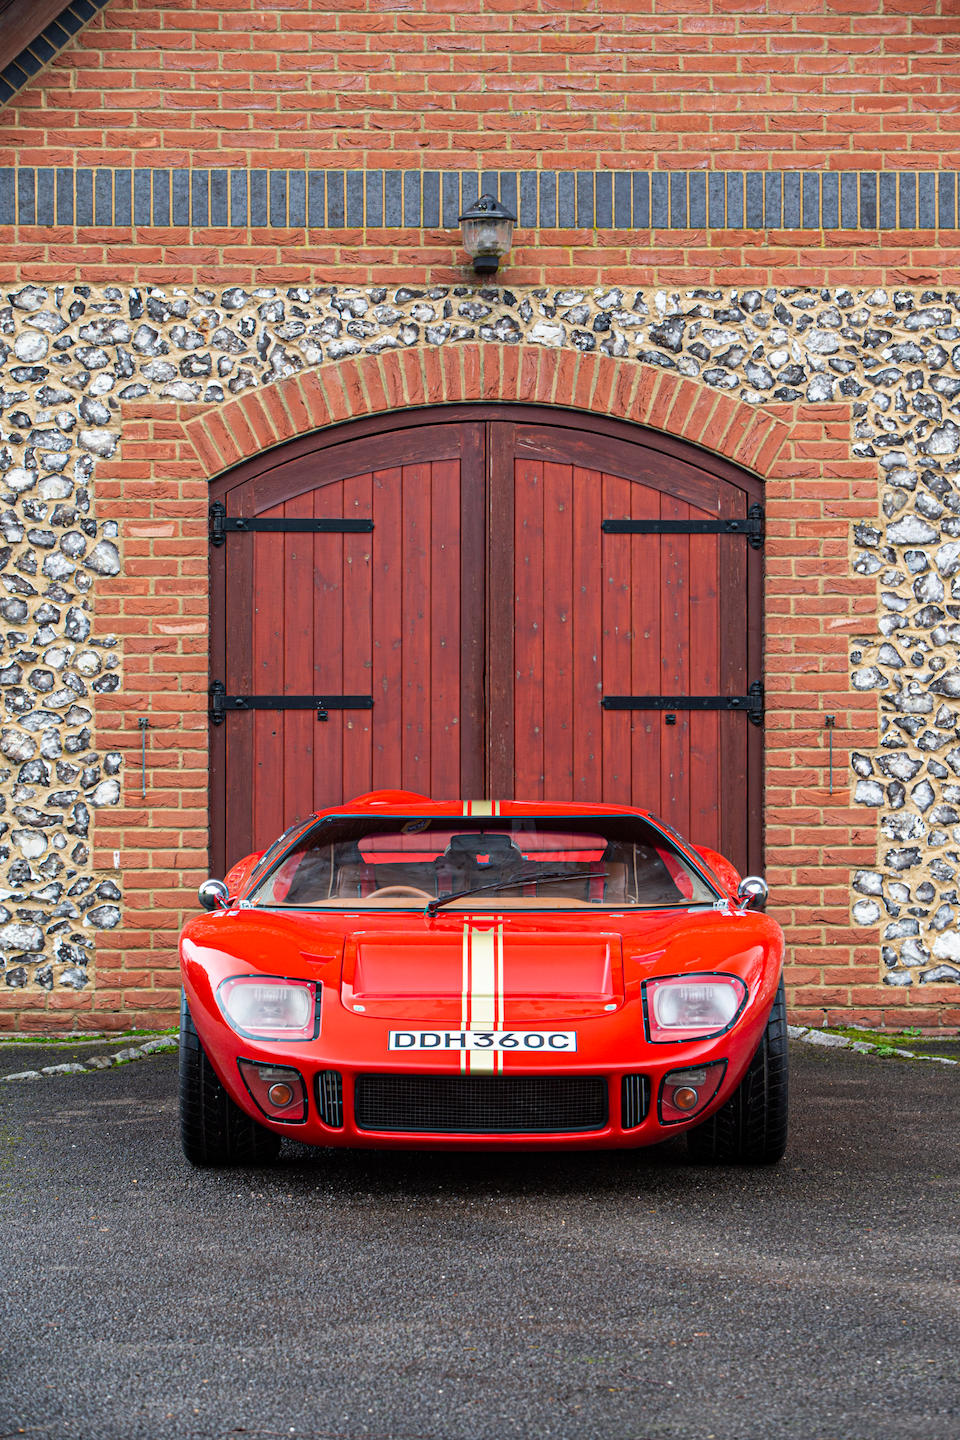 1989 Ford GT40 Replica by GTD  Chassis no. BA5EM45184